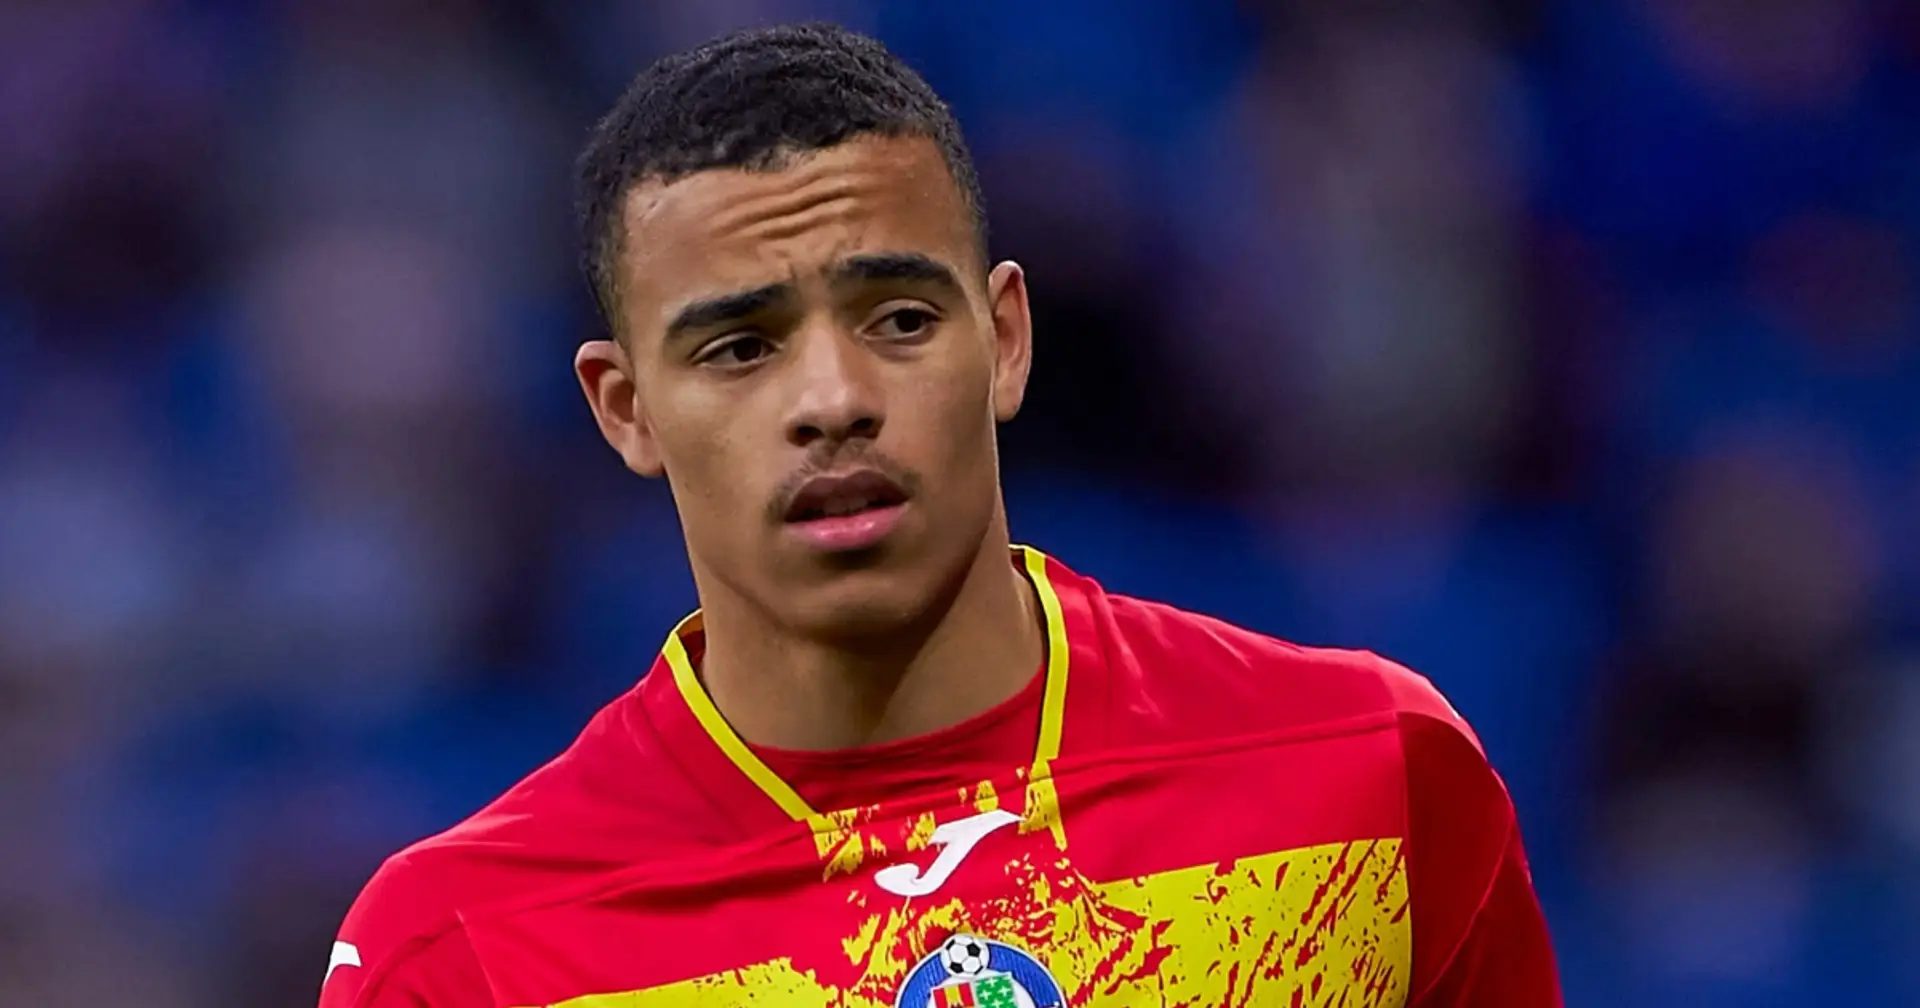 Getafe keen on another Mason Greenwood loan, Man United stance revealed (reliability: 3 stars)